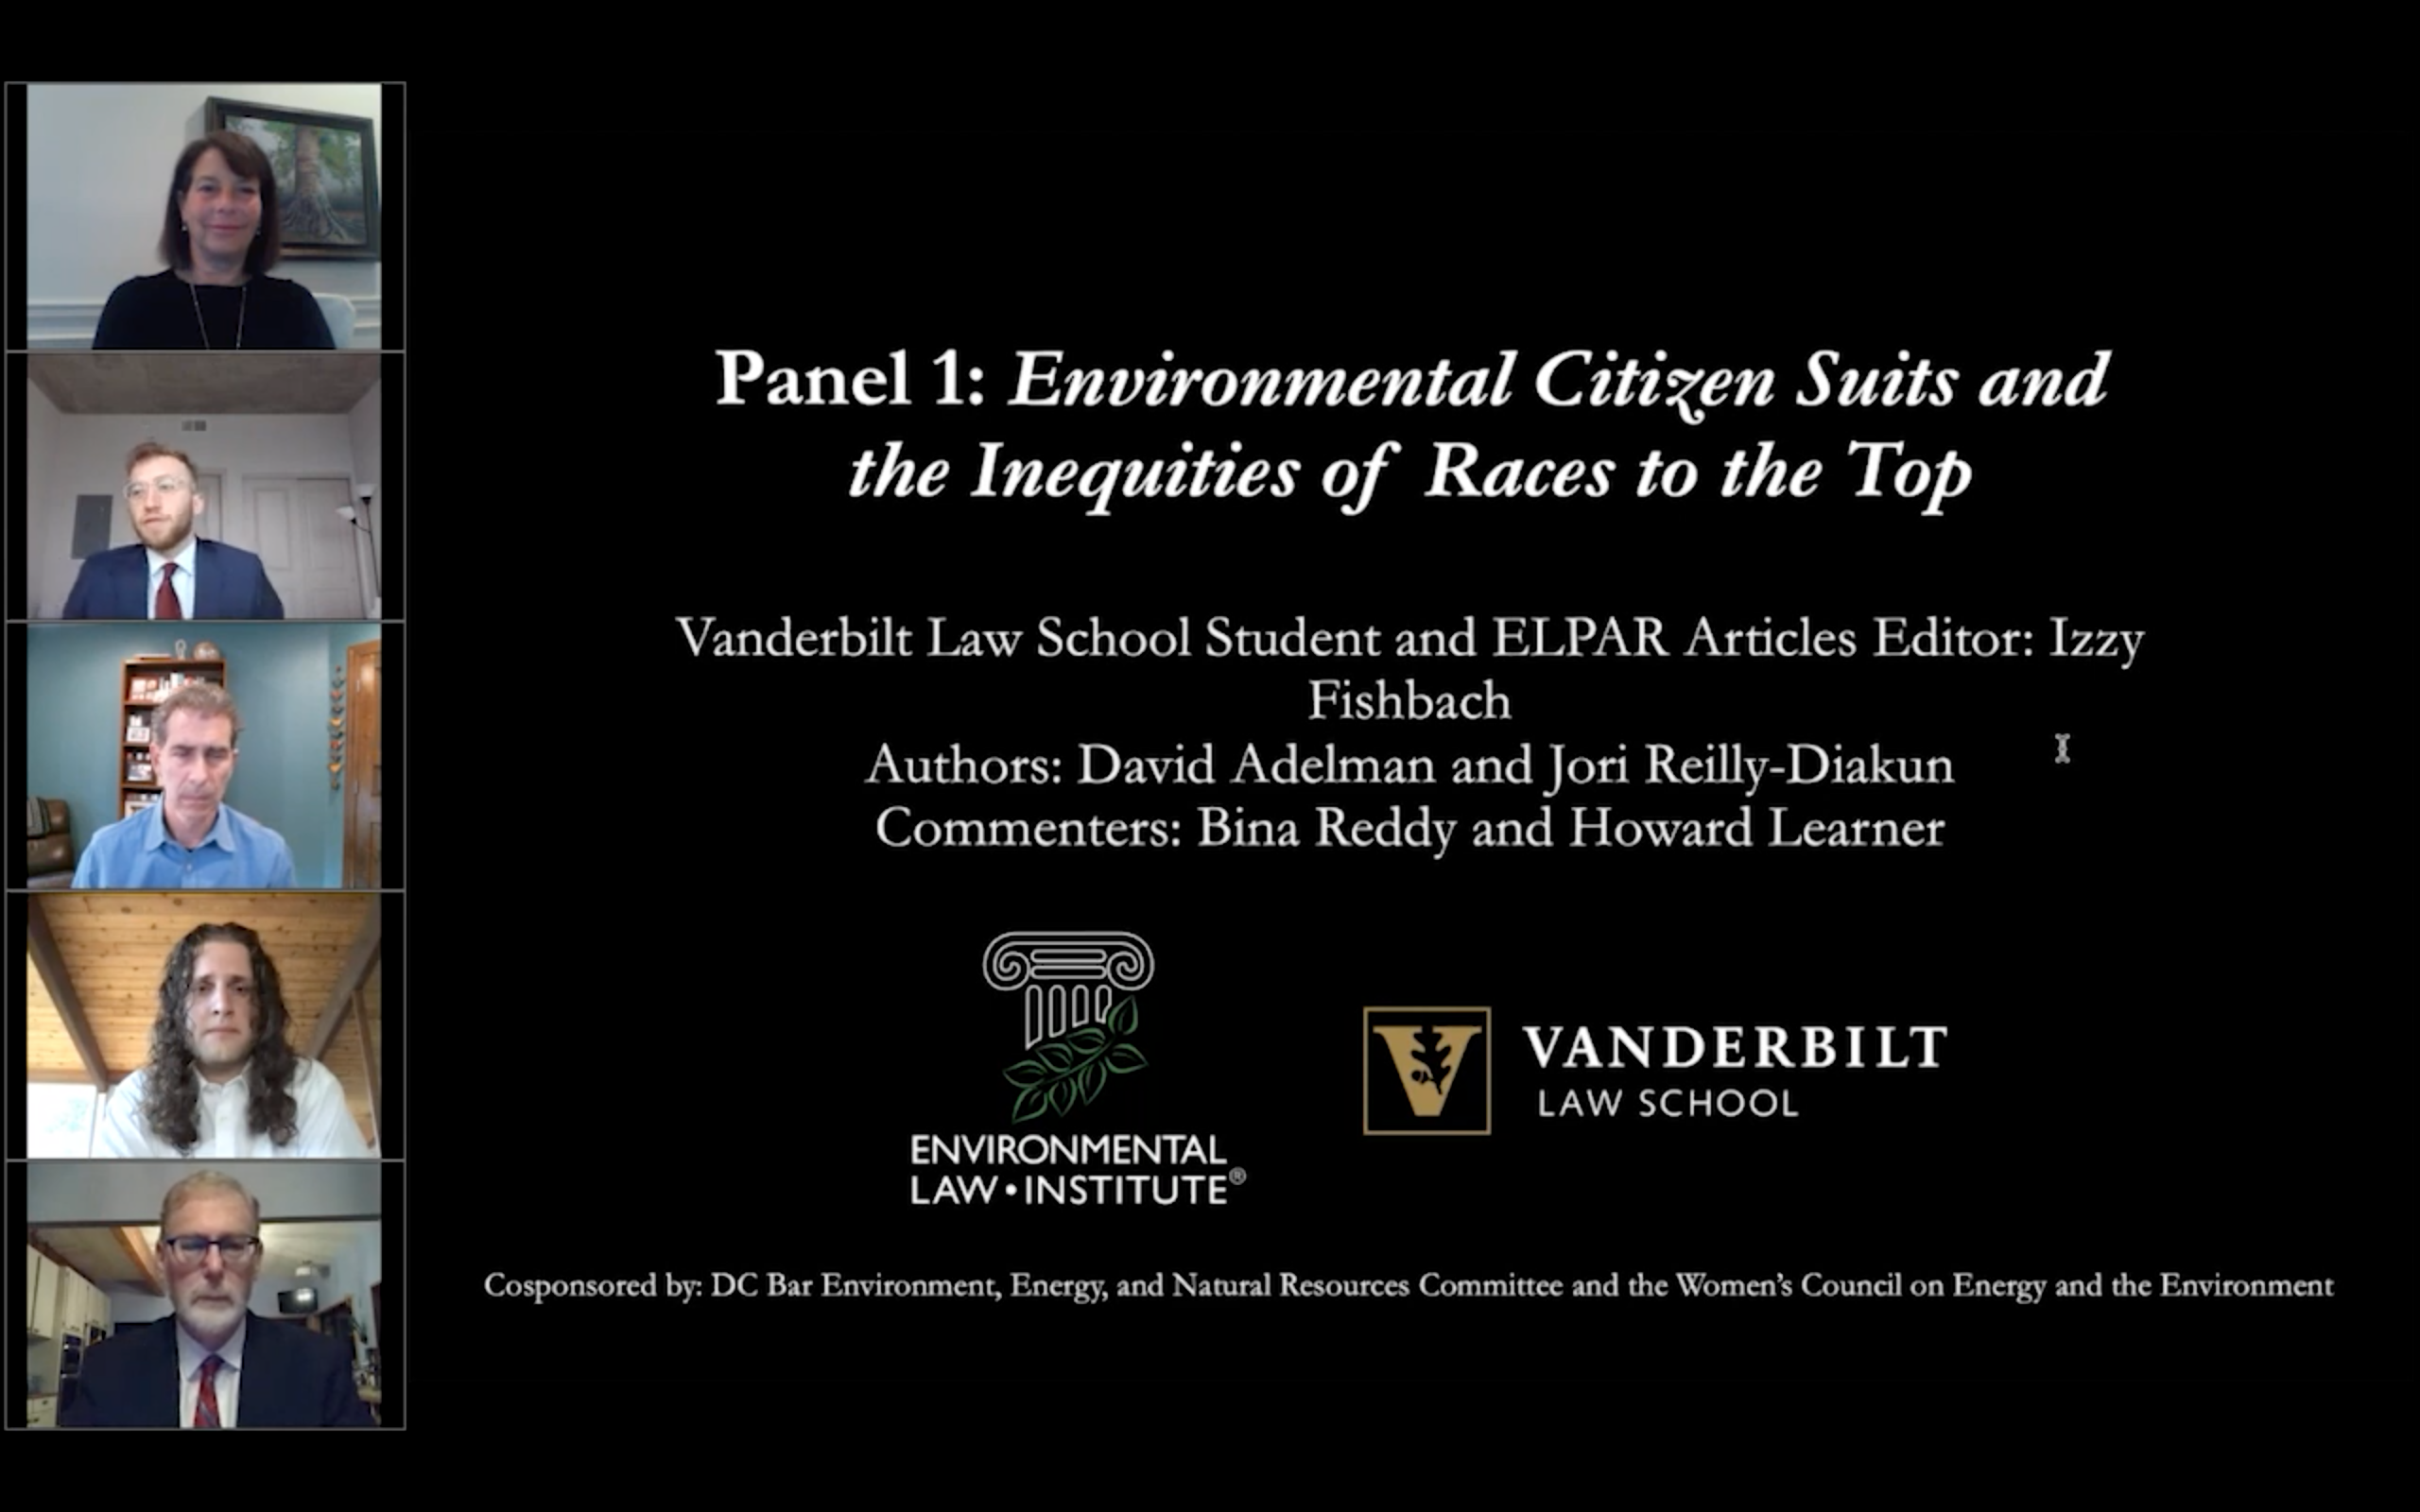 Screenshot of panel one title page and panelists